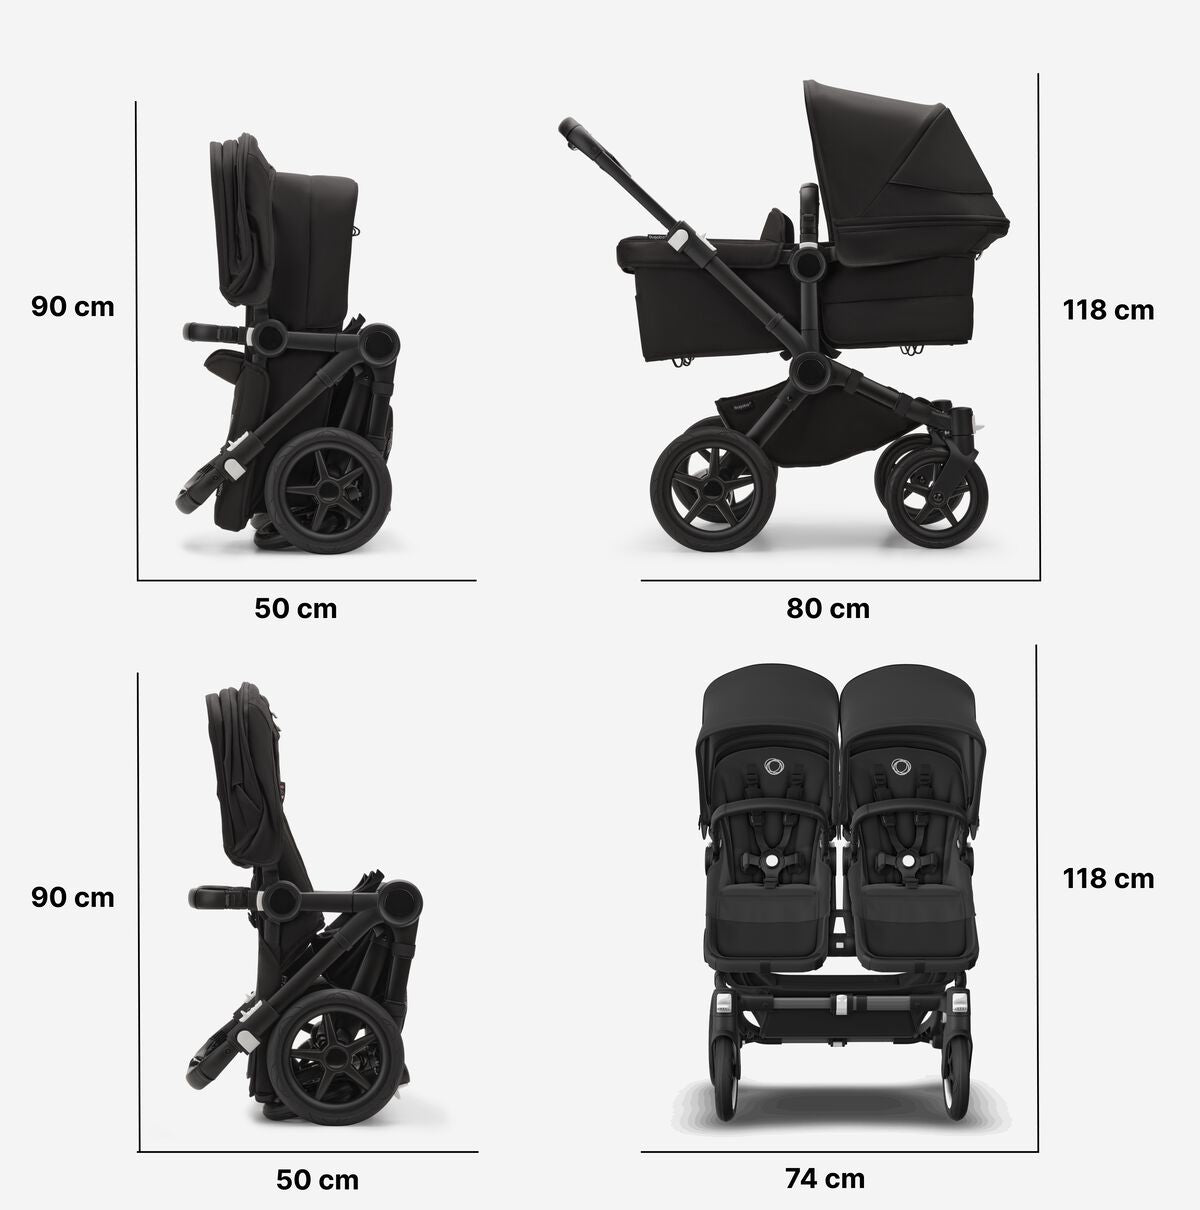 Bugaboo Donkey 5 Twin bassinet and seat stroller -Misty white sun canopy, midnight black fabrics, black chassis - Twinkle Twinkle Little One